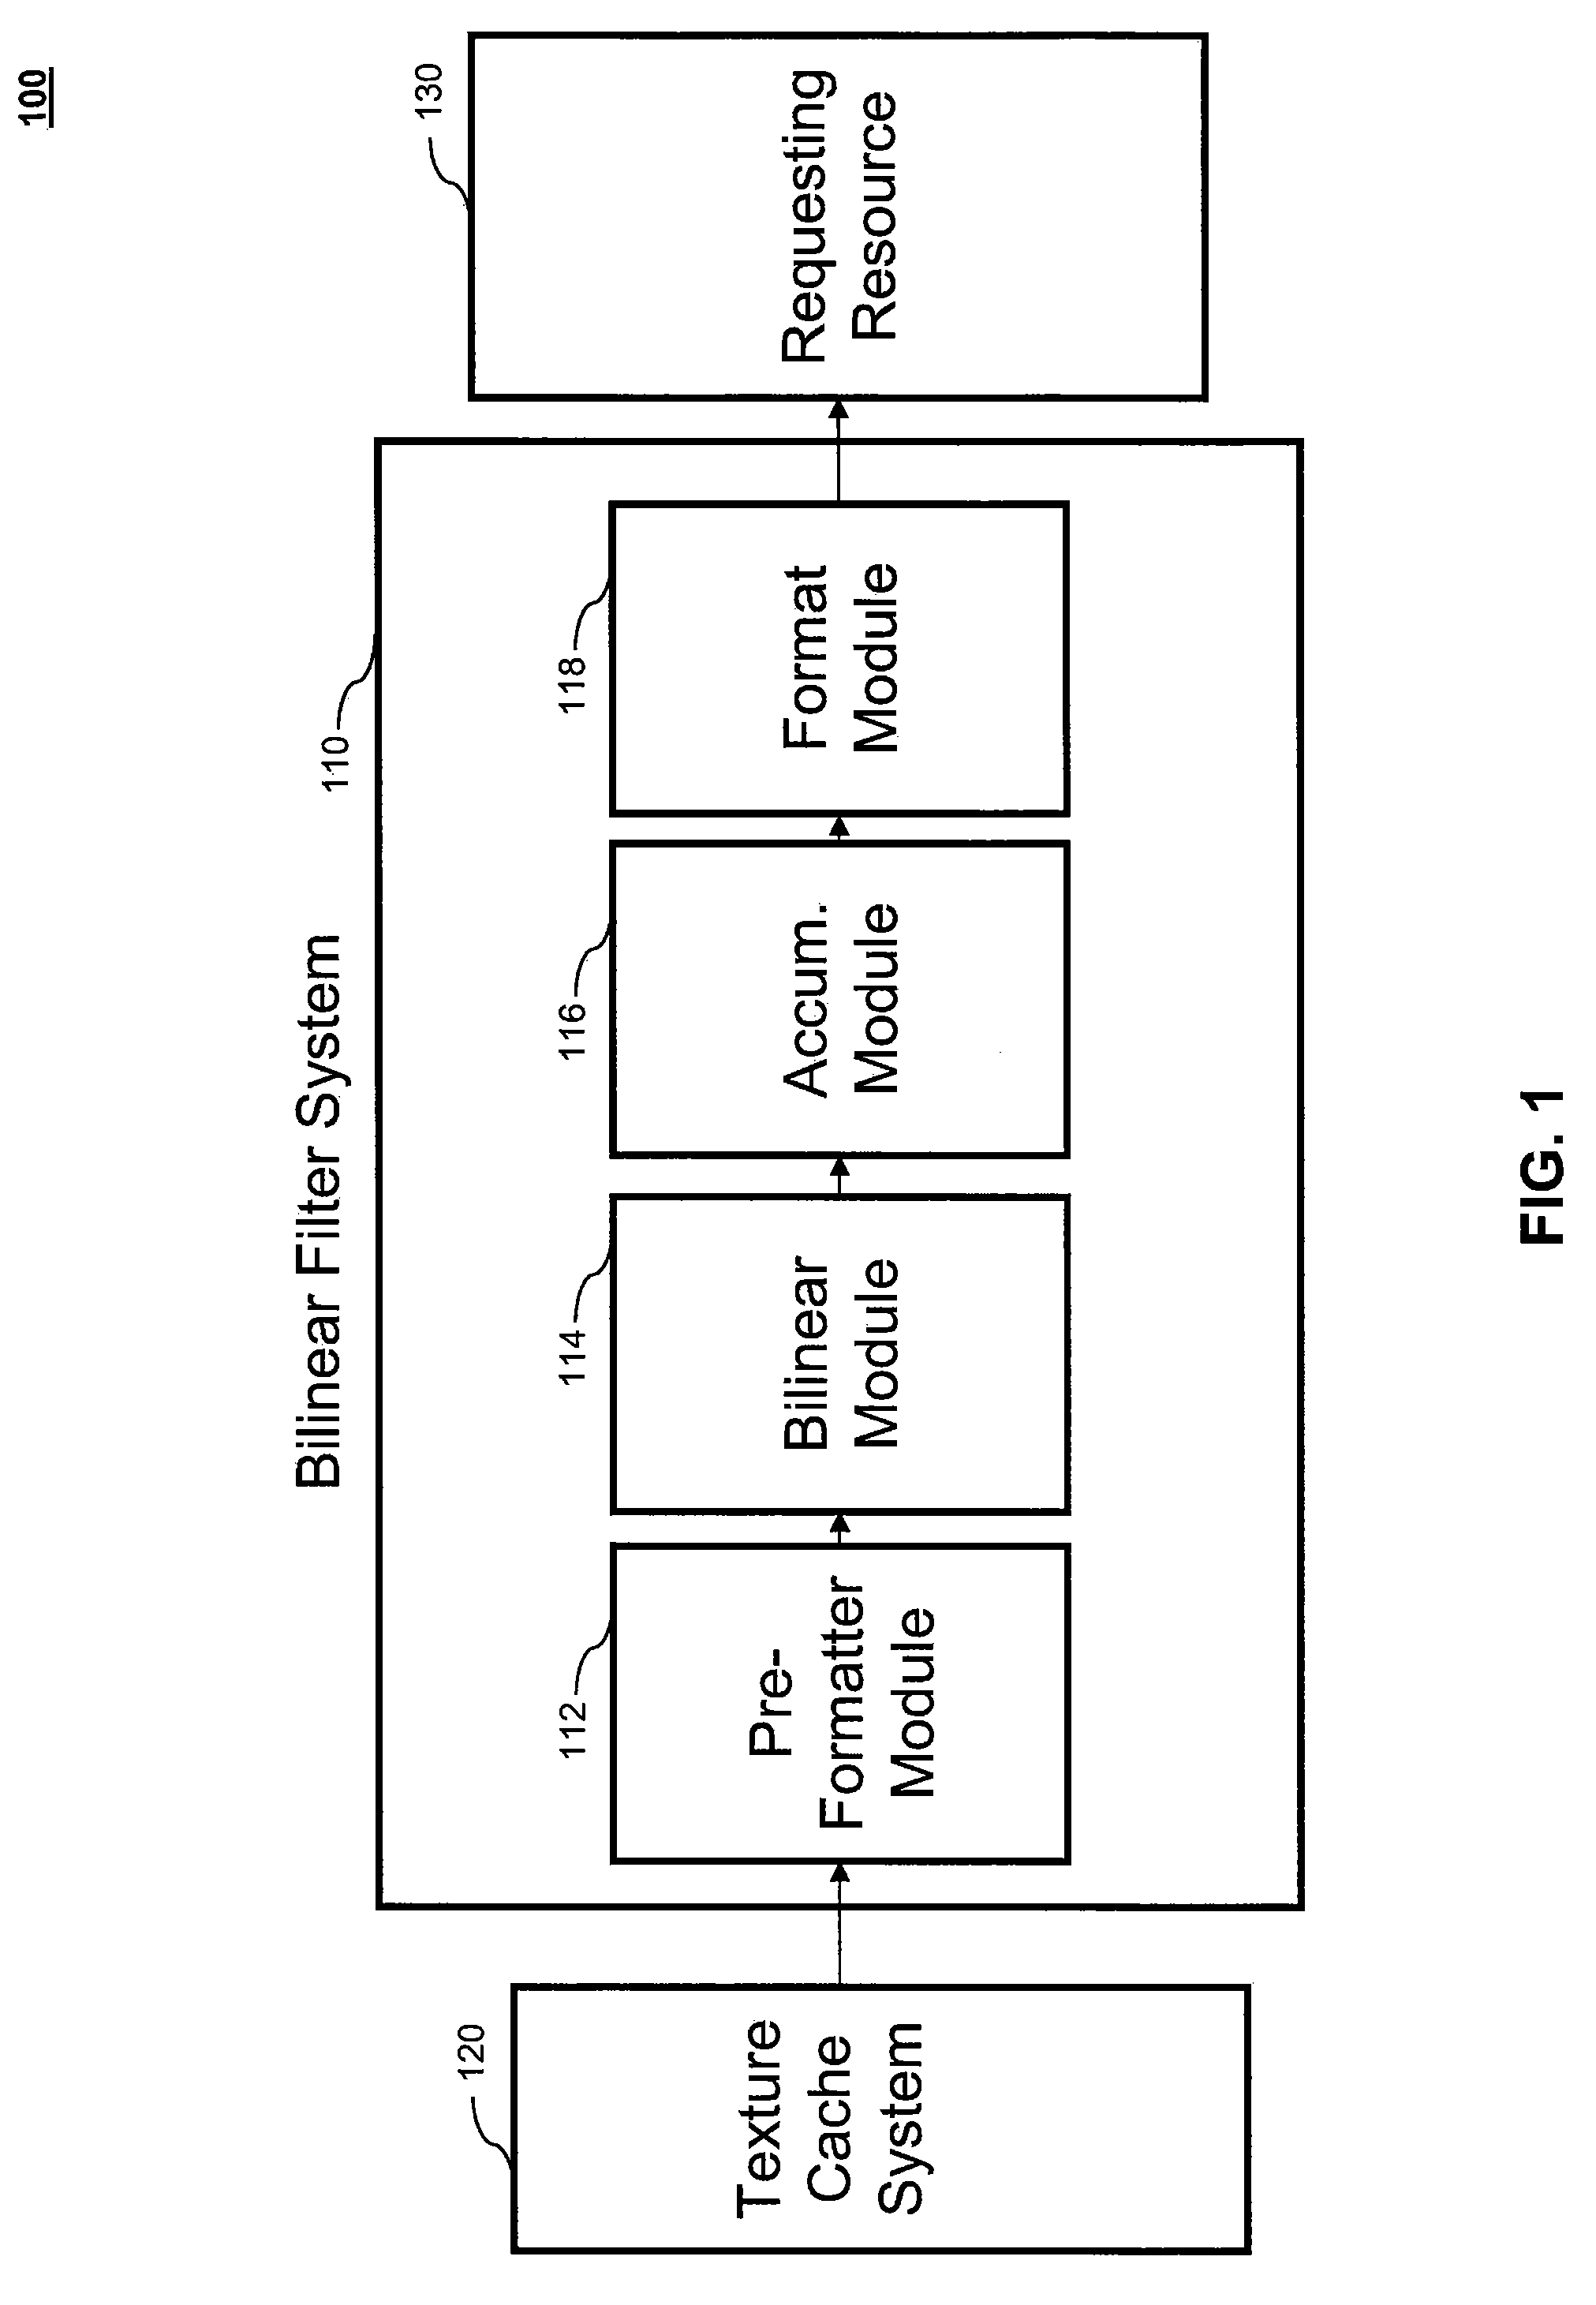 Dynamically Configurable Bilinear Filtering System